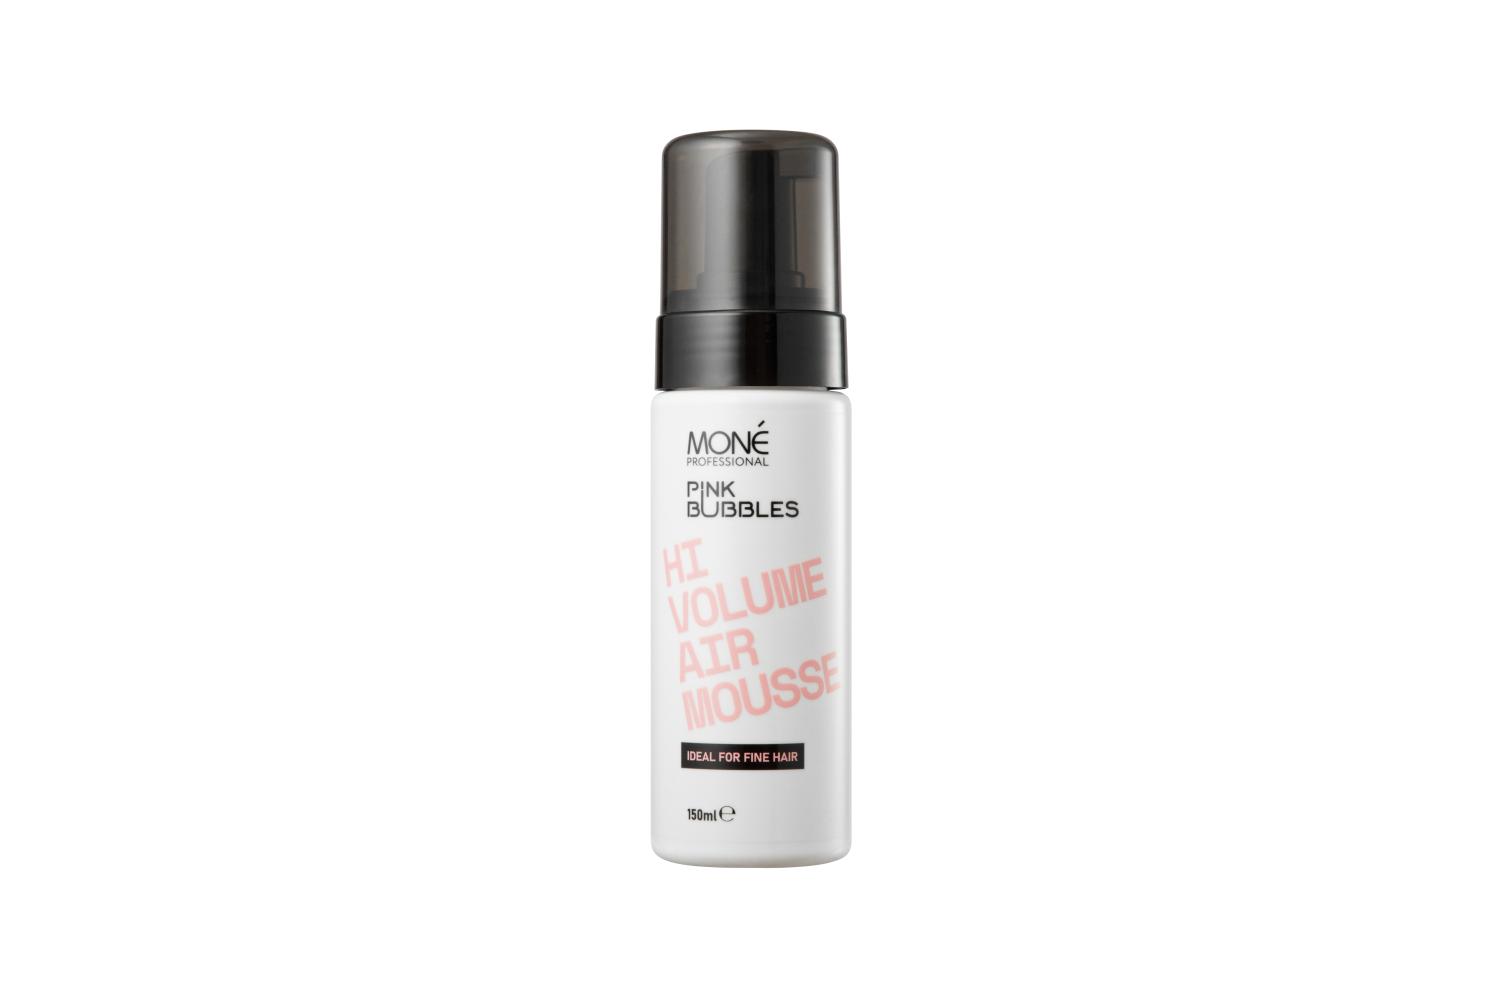 Styling mousse with the effect of additional volume HI Volume Air Mousse, Mone Professional